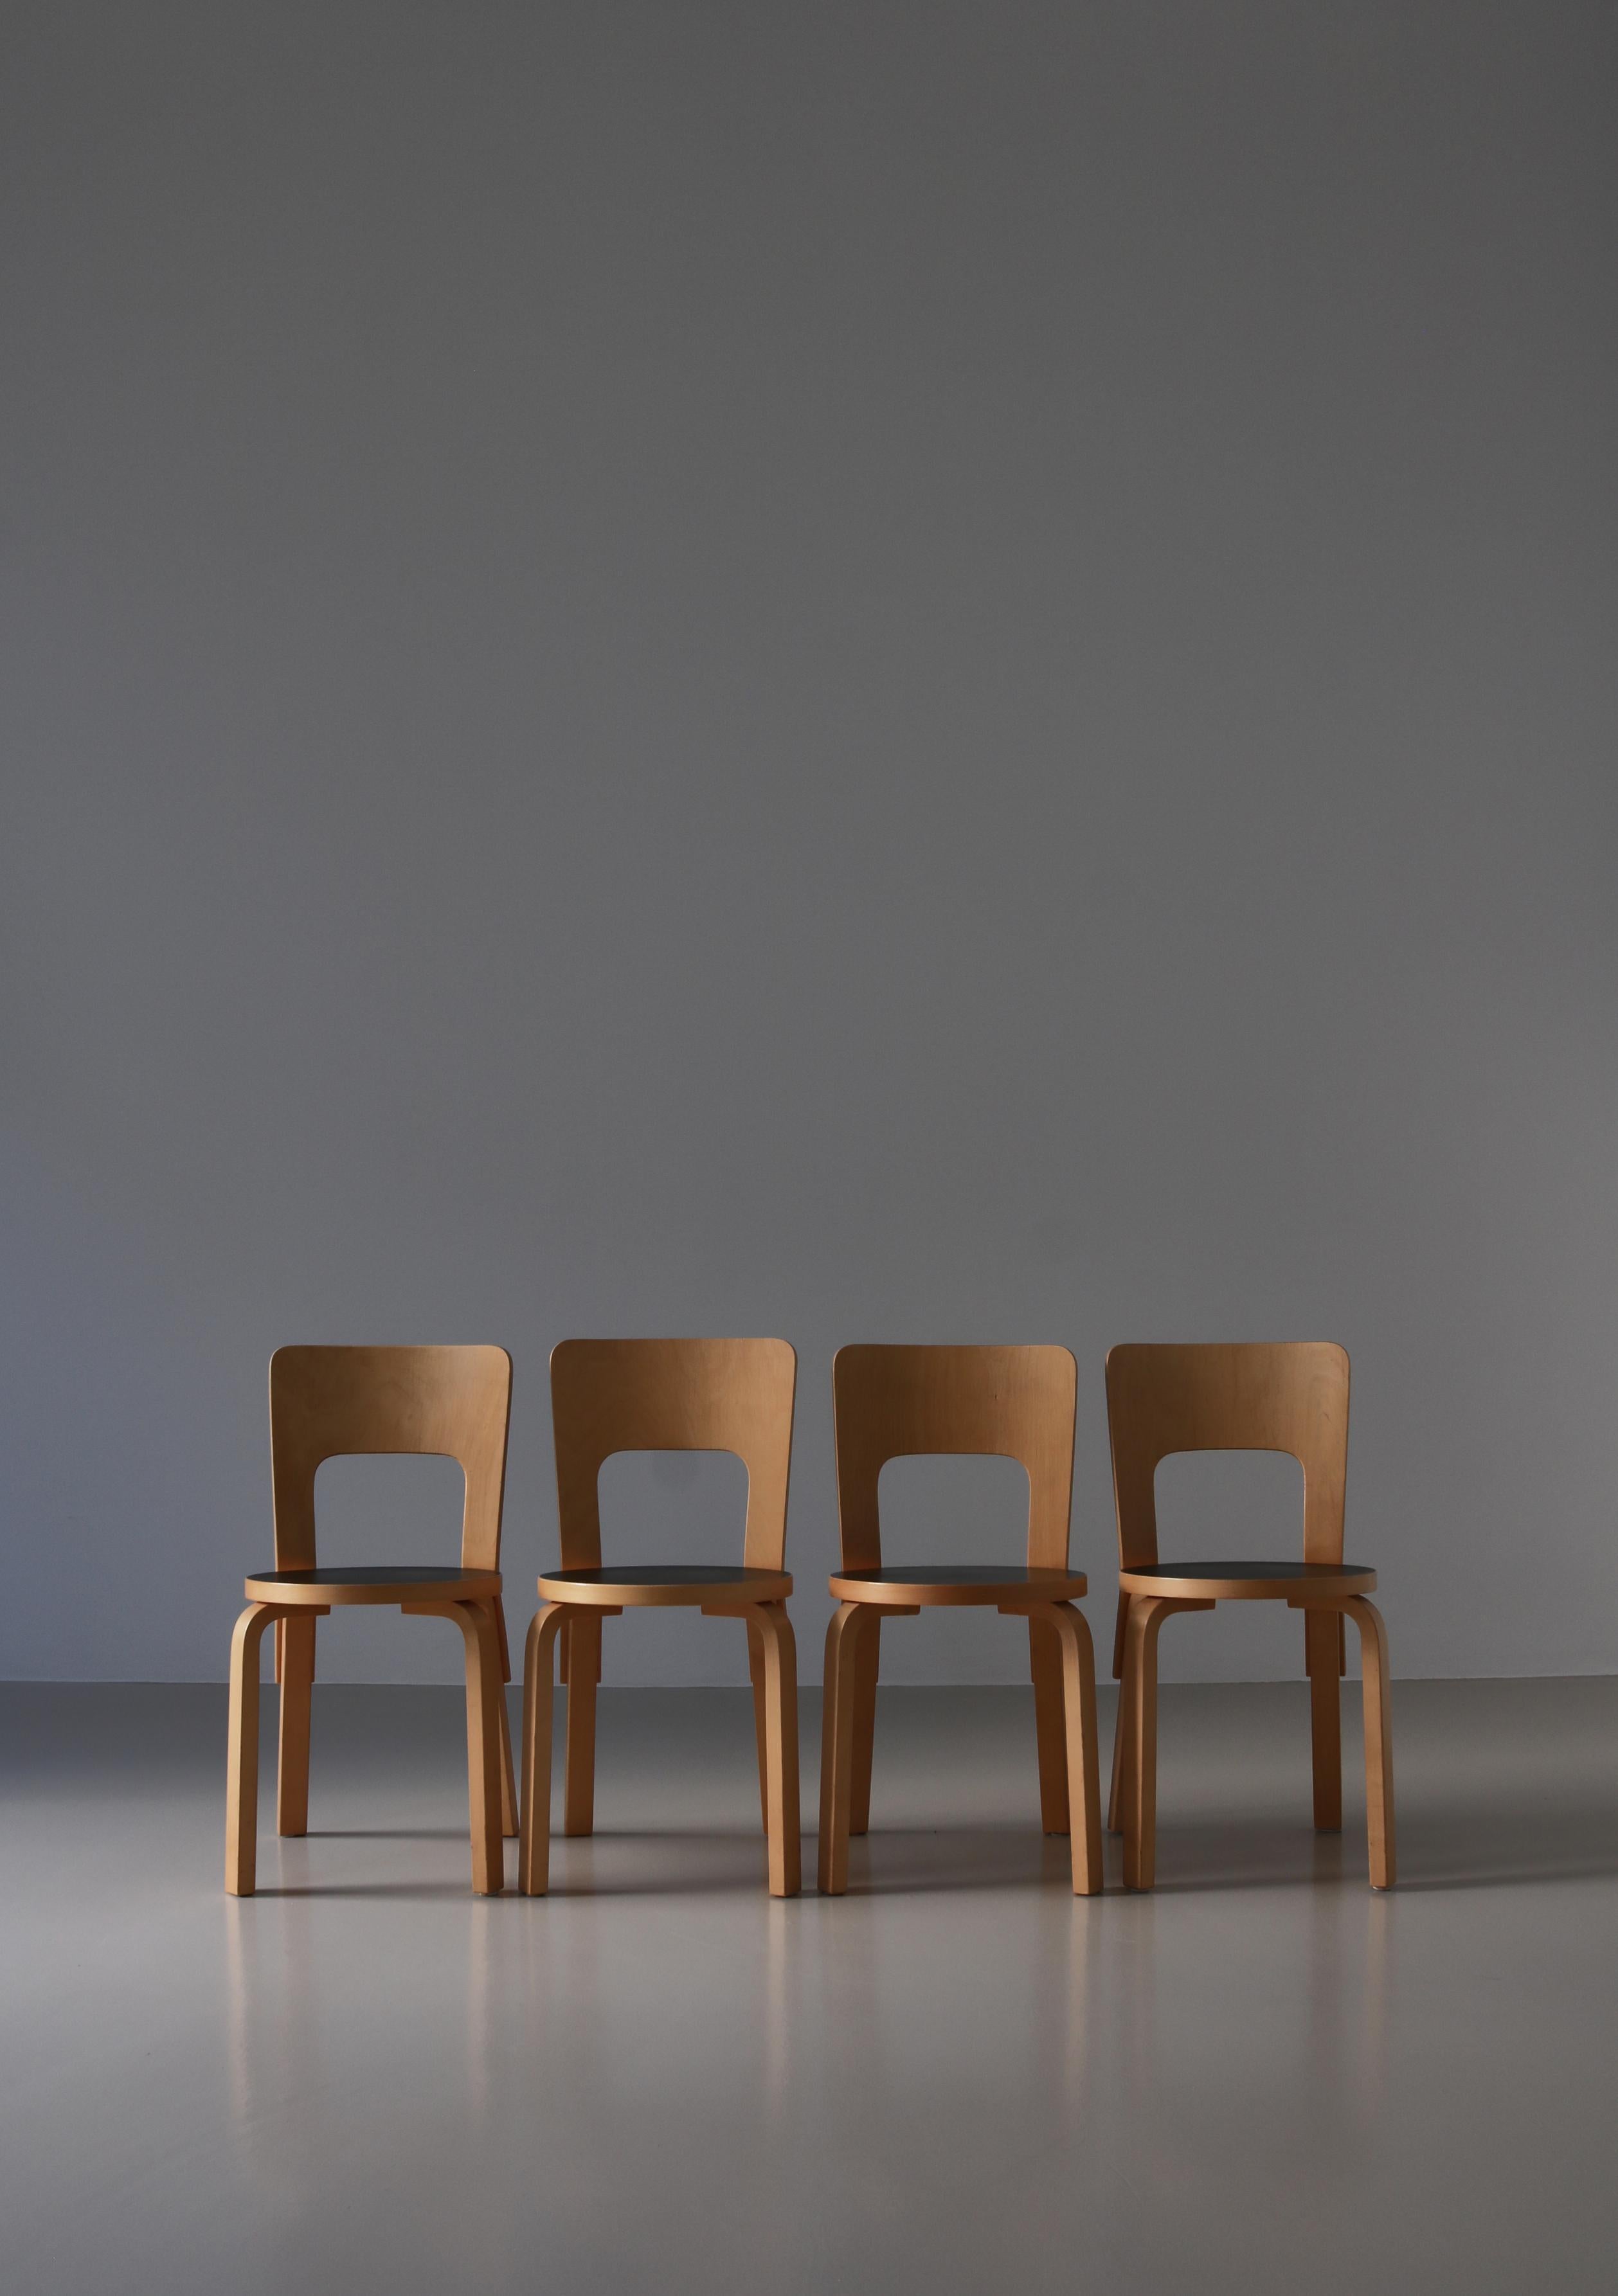 Set of vintage production model 66 chair by Alvar Aalto made in the 1960s. The chairs are made of laminated birch and black linoleum and have a beautiful glow and patina. Beautifully worn but without any structural damages.
Aaltos iconic Chair 66 is